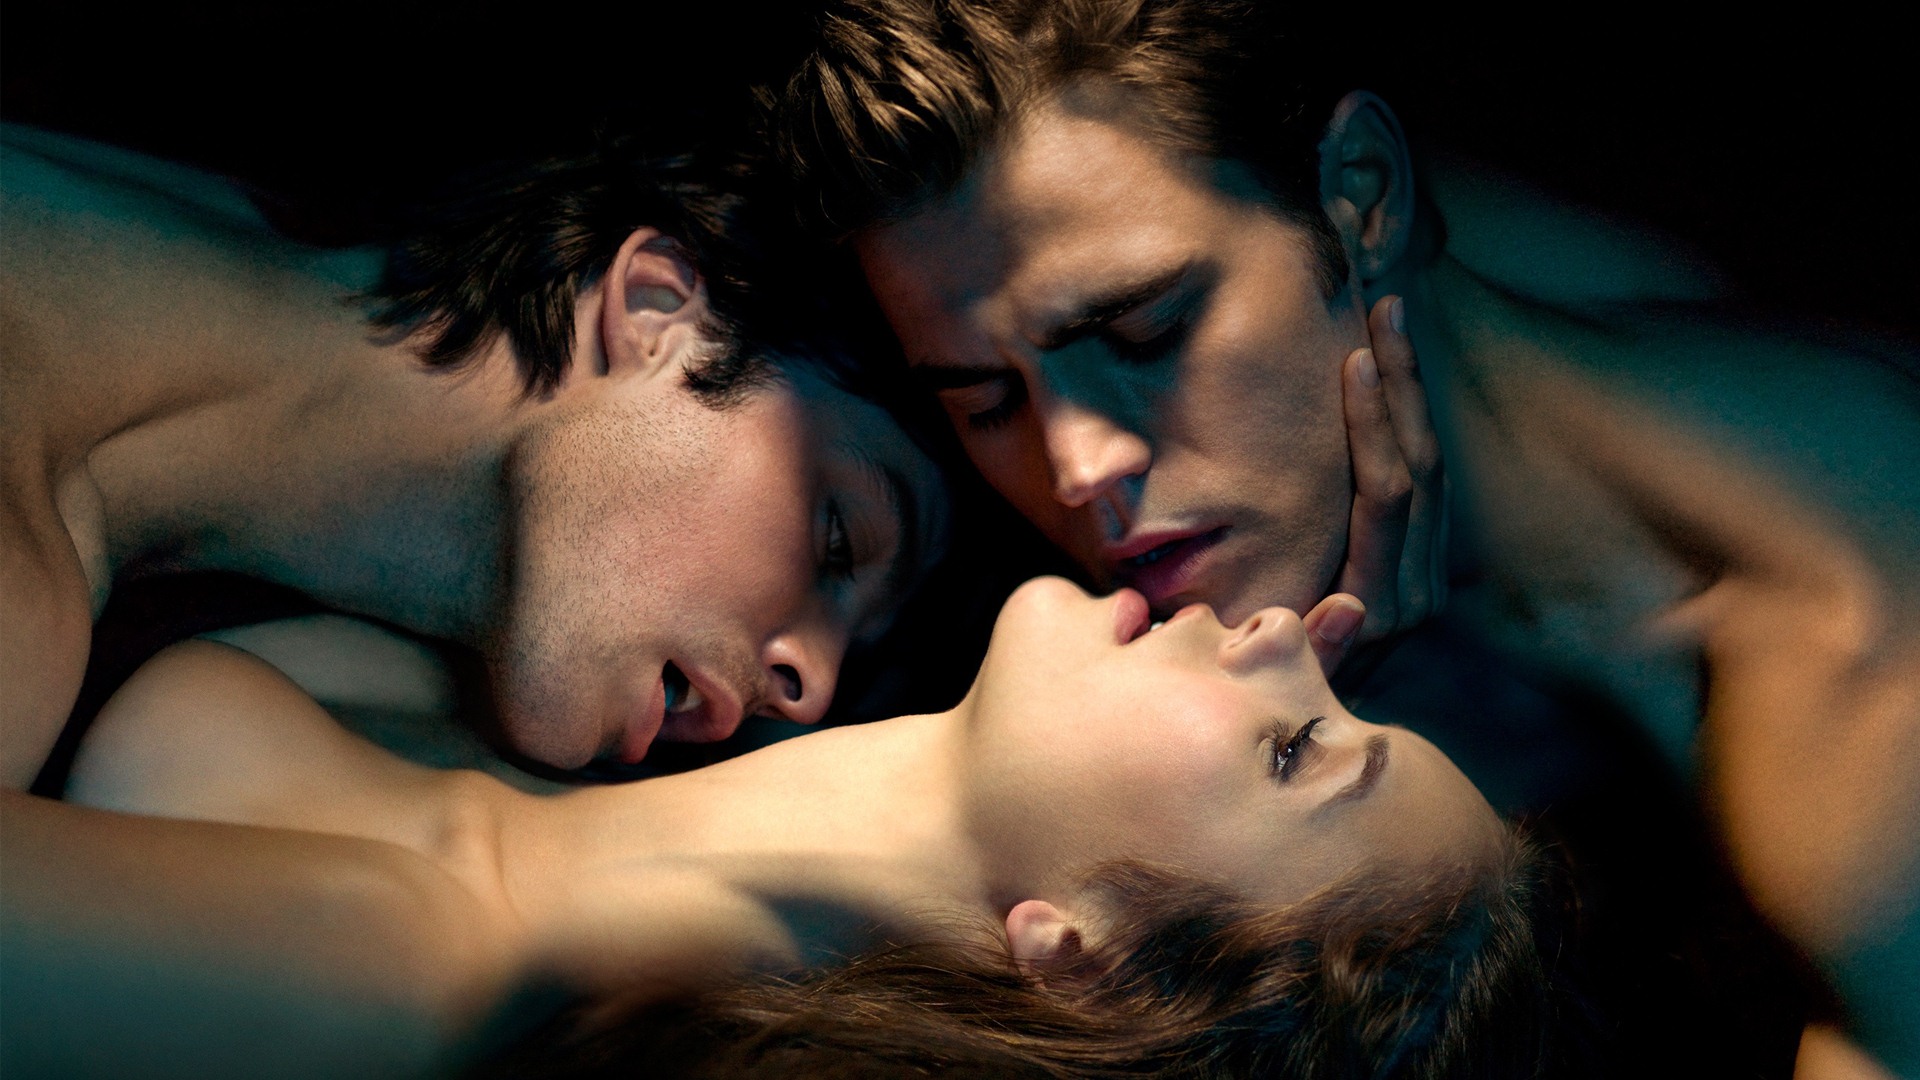 The Vampire Diaries HD Wallpapers #5 - 1920x1080